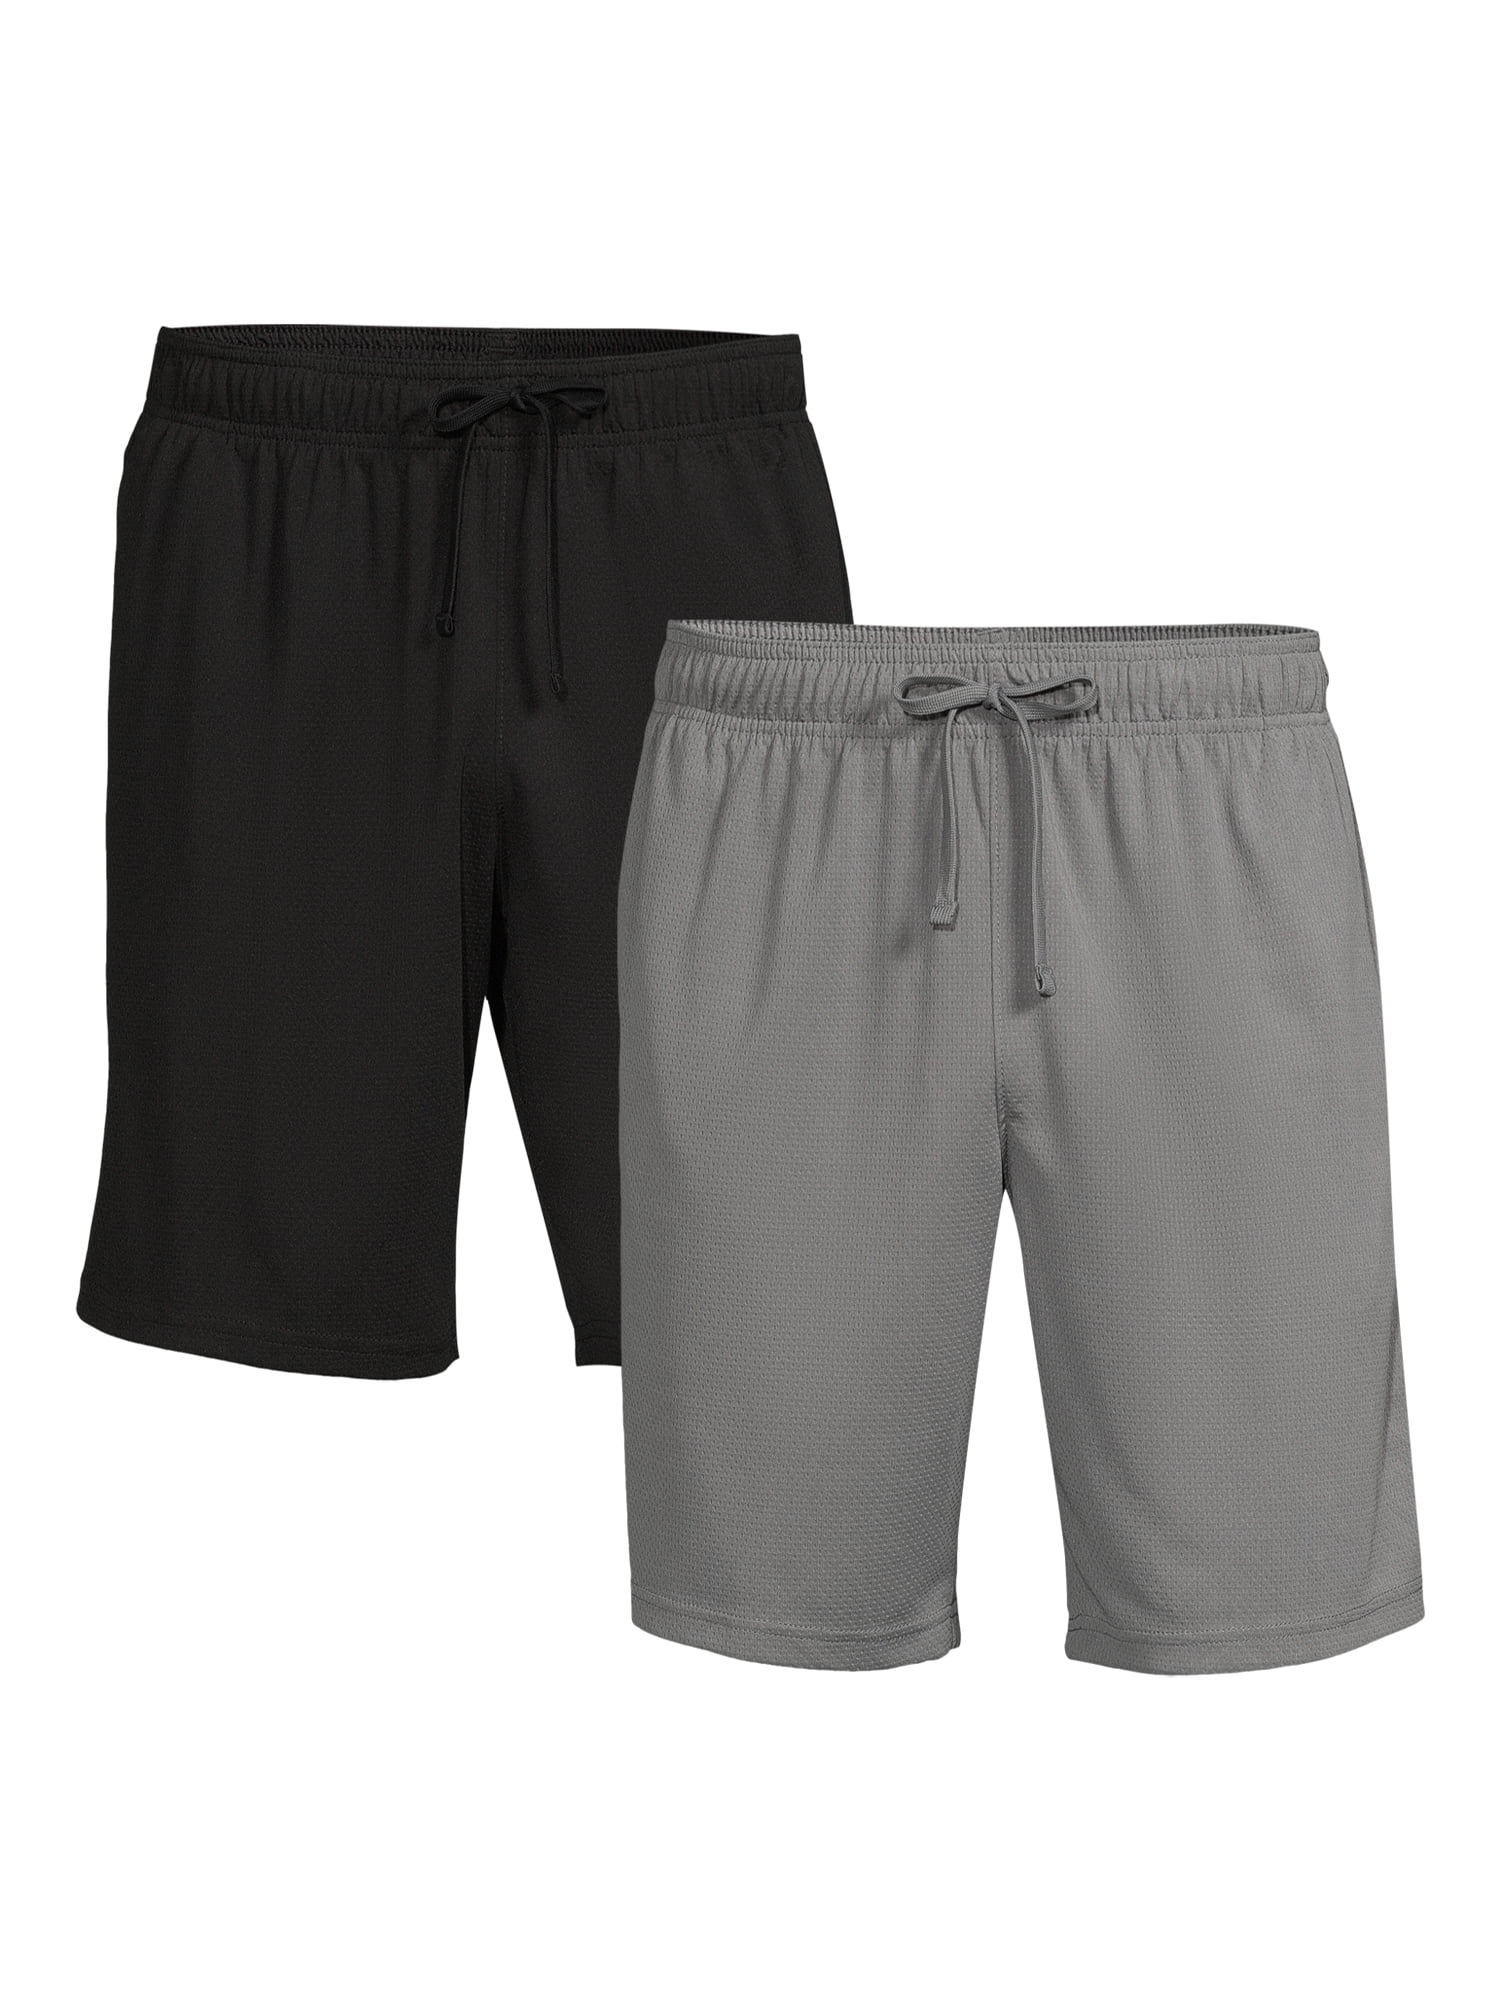 Athletic Works Men's and Big Men's Active Shorts Set, 2-Pack, Sizes S ...